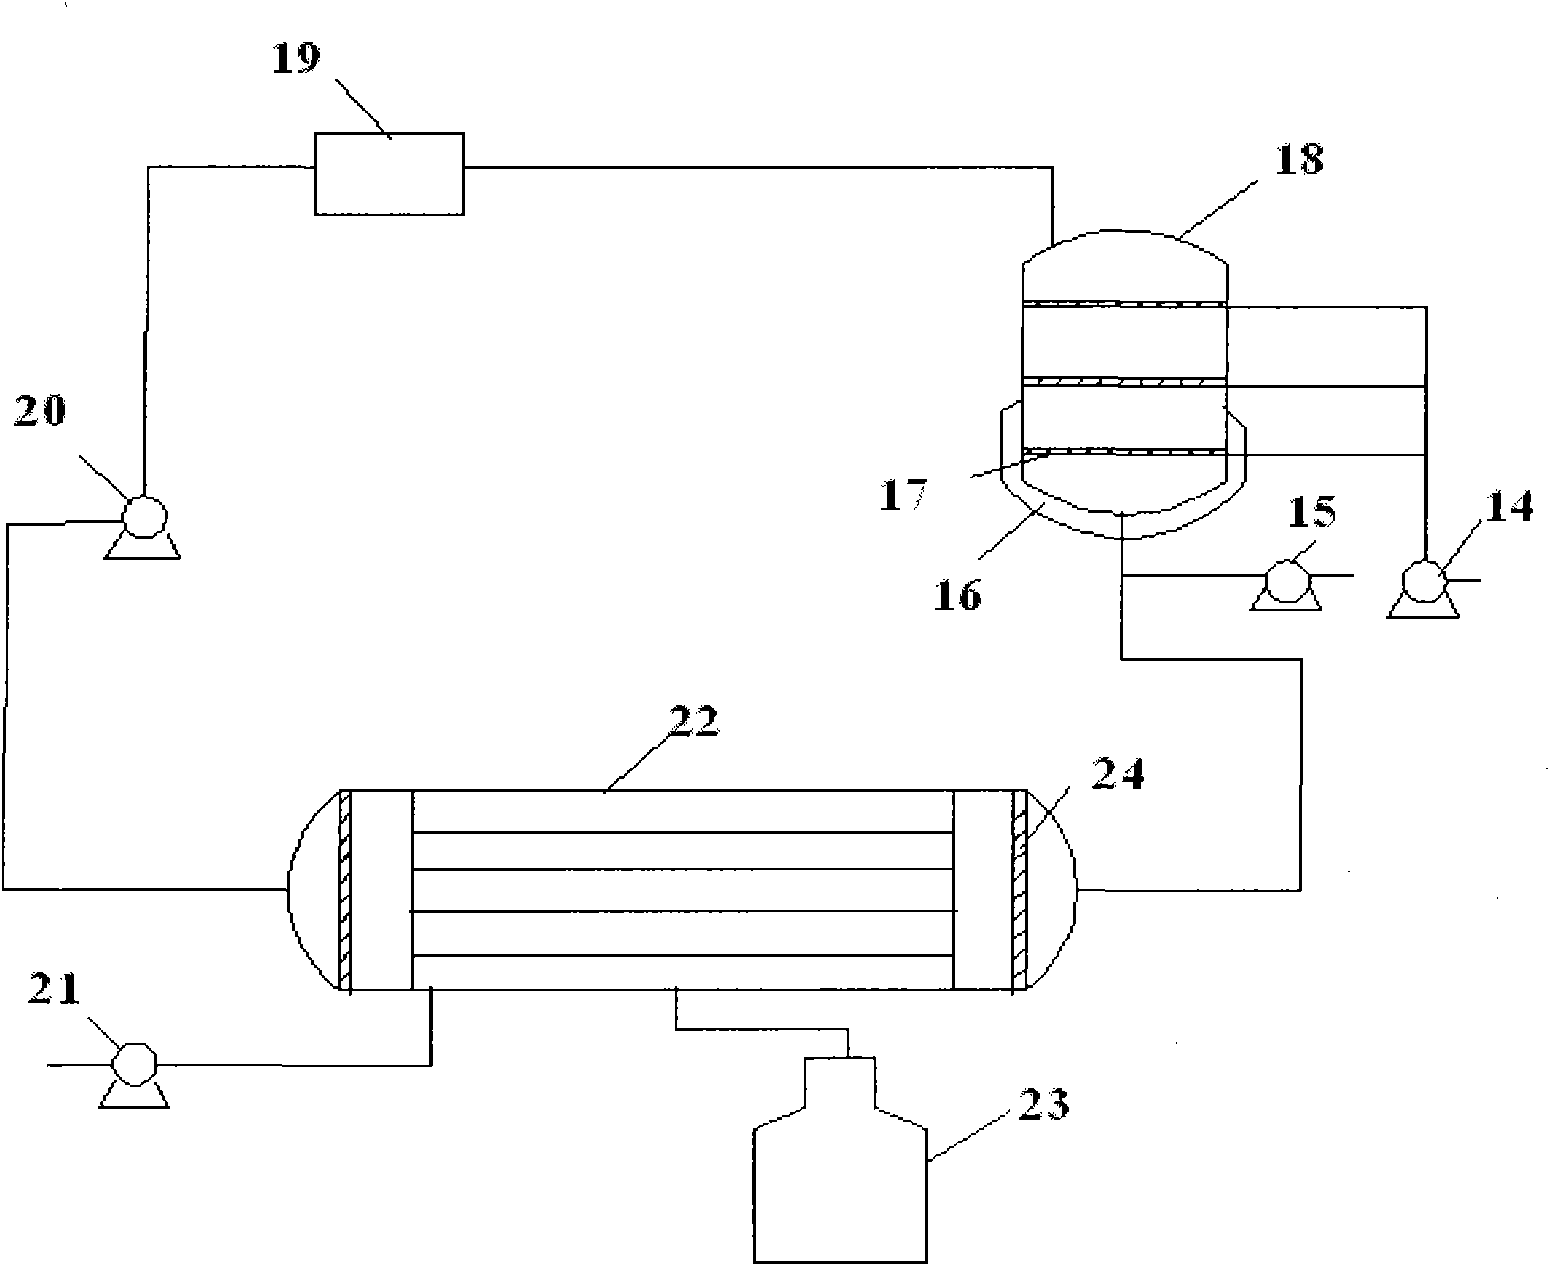 Membrane reactor for use in hydrocarbon oxidization reaction-separation coupling process